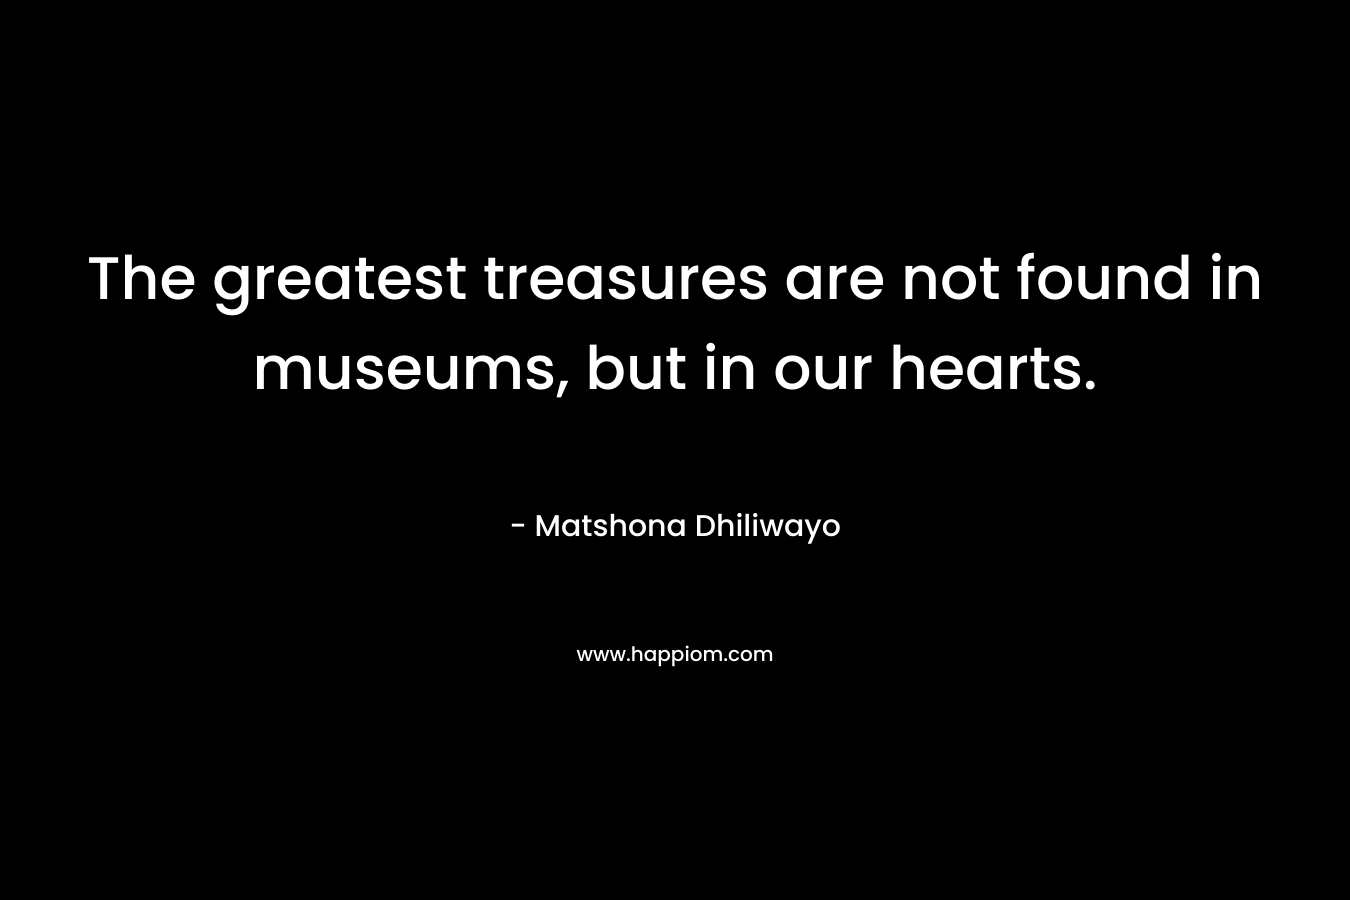 The greatest treasures are not found in museums, but in our hearts. – Matshona Dhiliwayo